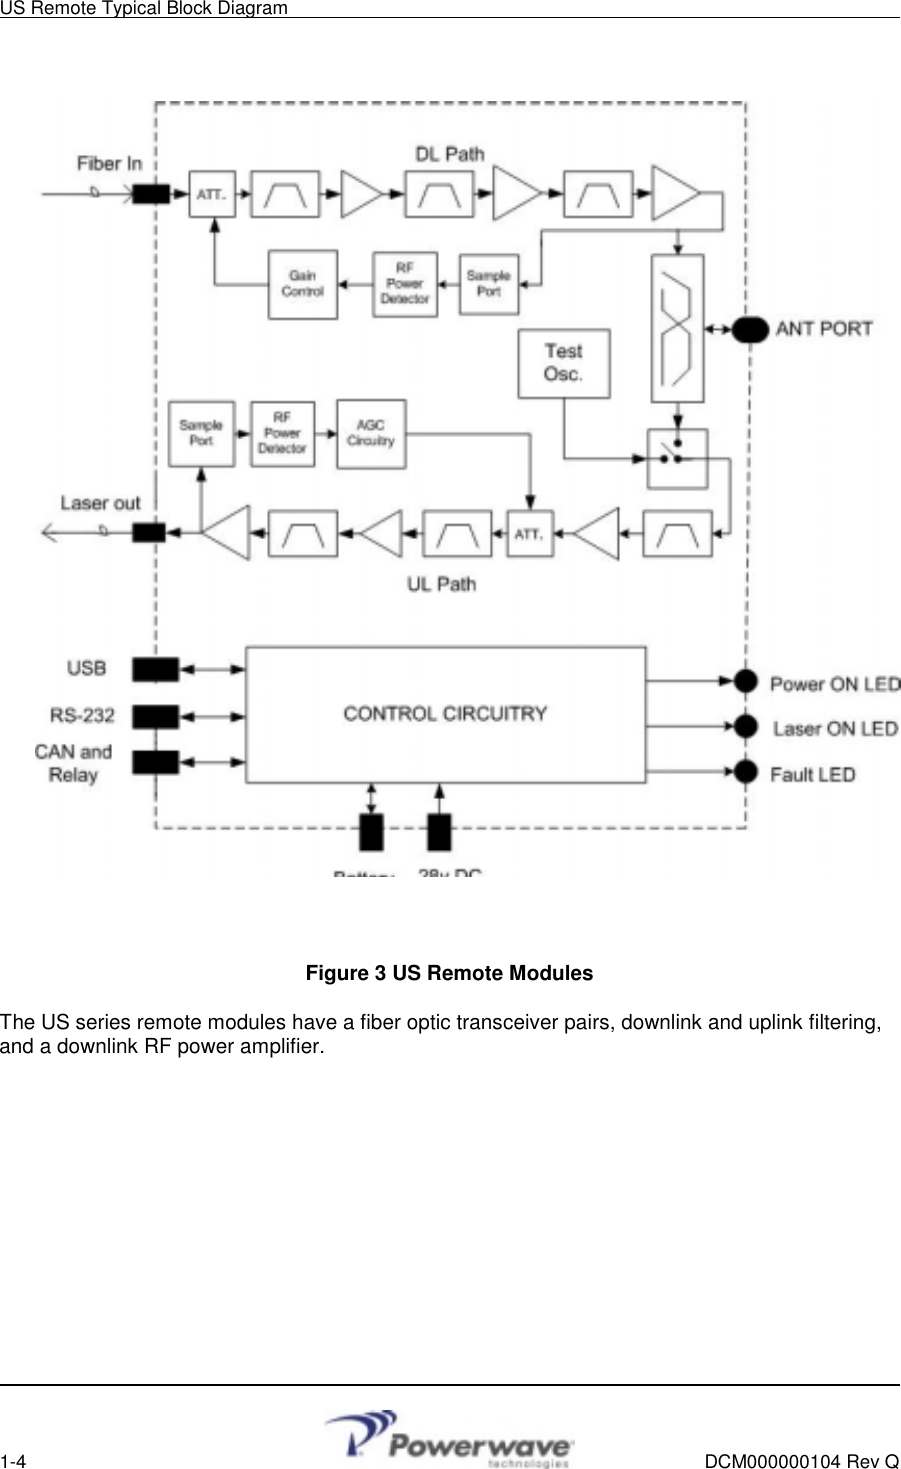 US Remote Typical Block Diagram        1-4    DCM000000104 Rev Q                     Figure 3 US Remote Modules The US series remote modules have a fiber optic transceiver pairs, downlink and uplink filtering, and a downlink RF power amplifier.      